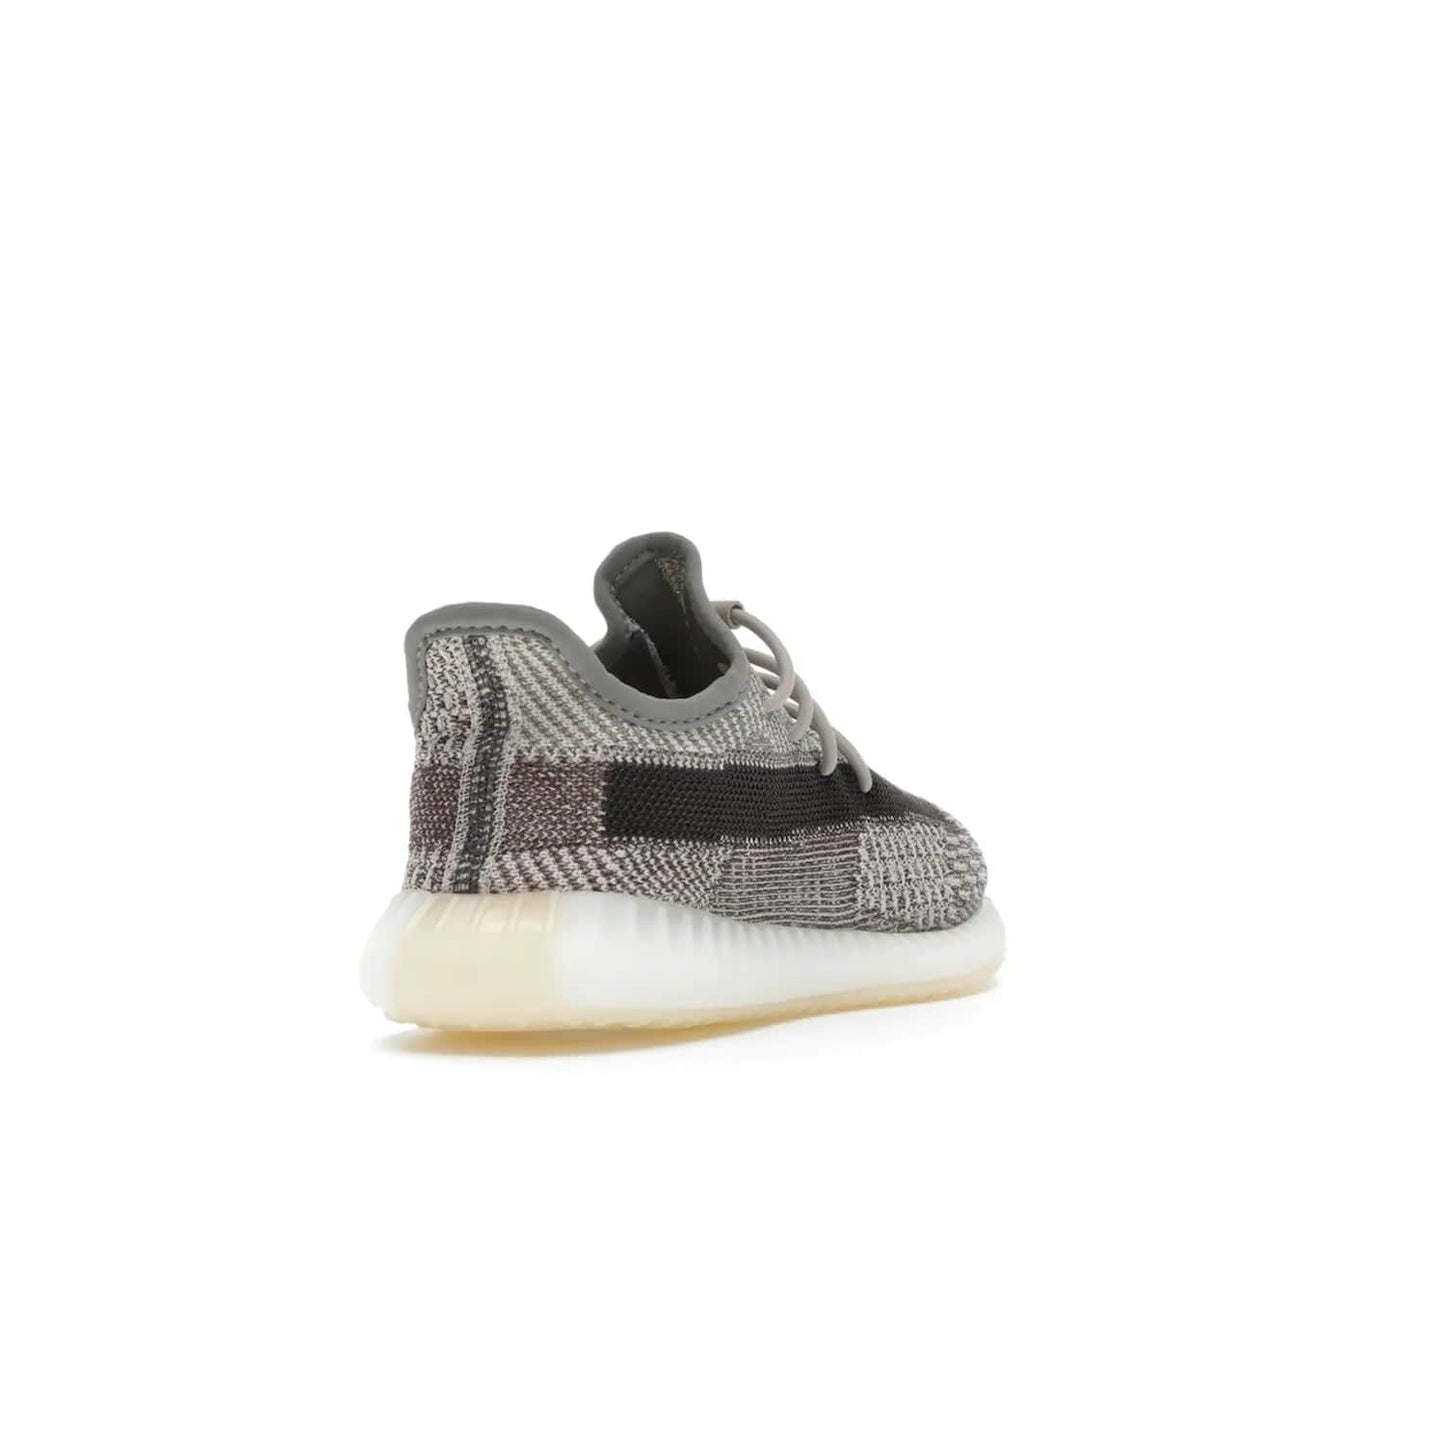 adidas Yeezy Boost 350 V2 Zyon (Kids) - Image 31 - Only at www.BallersClubKickz.com - The adidas Yeezy Boost 350 V2 Zyon (Kids) - perfect pick for fashion-savvy kids. Features soft Primeknit upper, lace closure & colorful patterning. Comfort & style for kids' summer outfits!